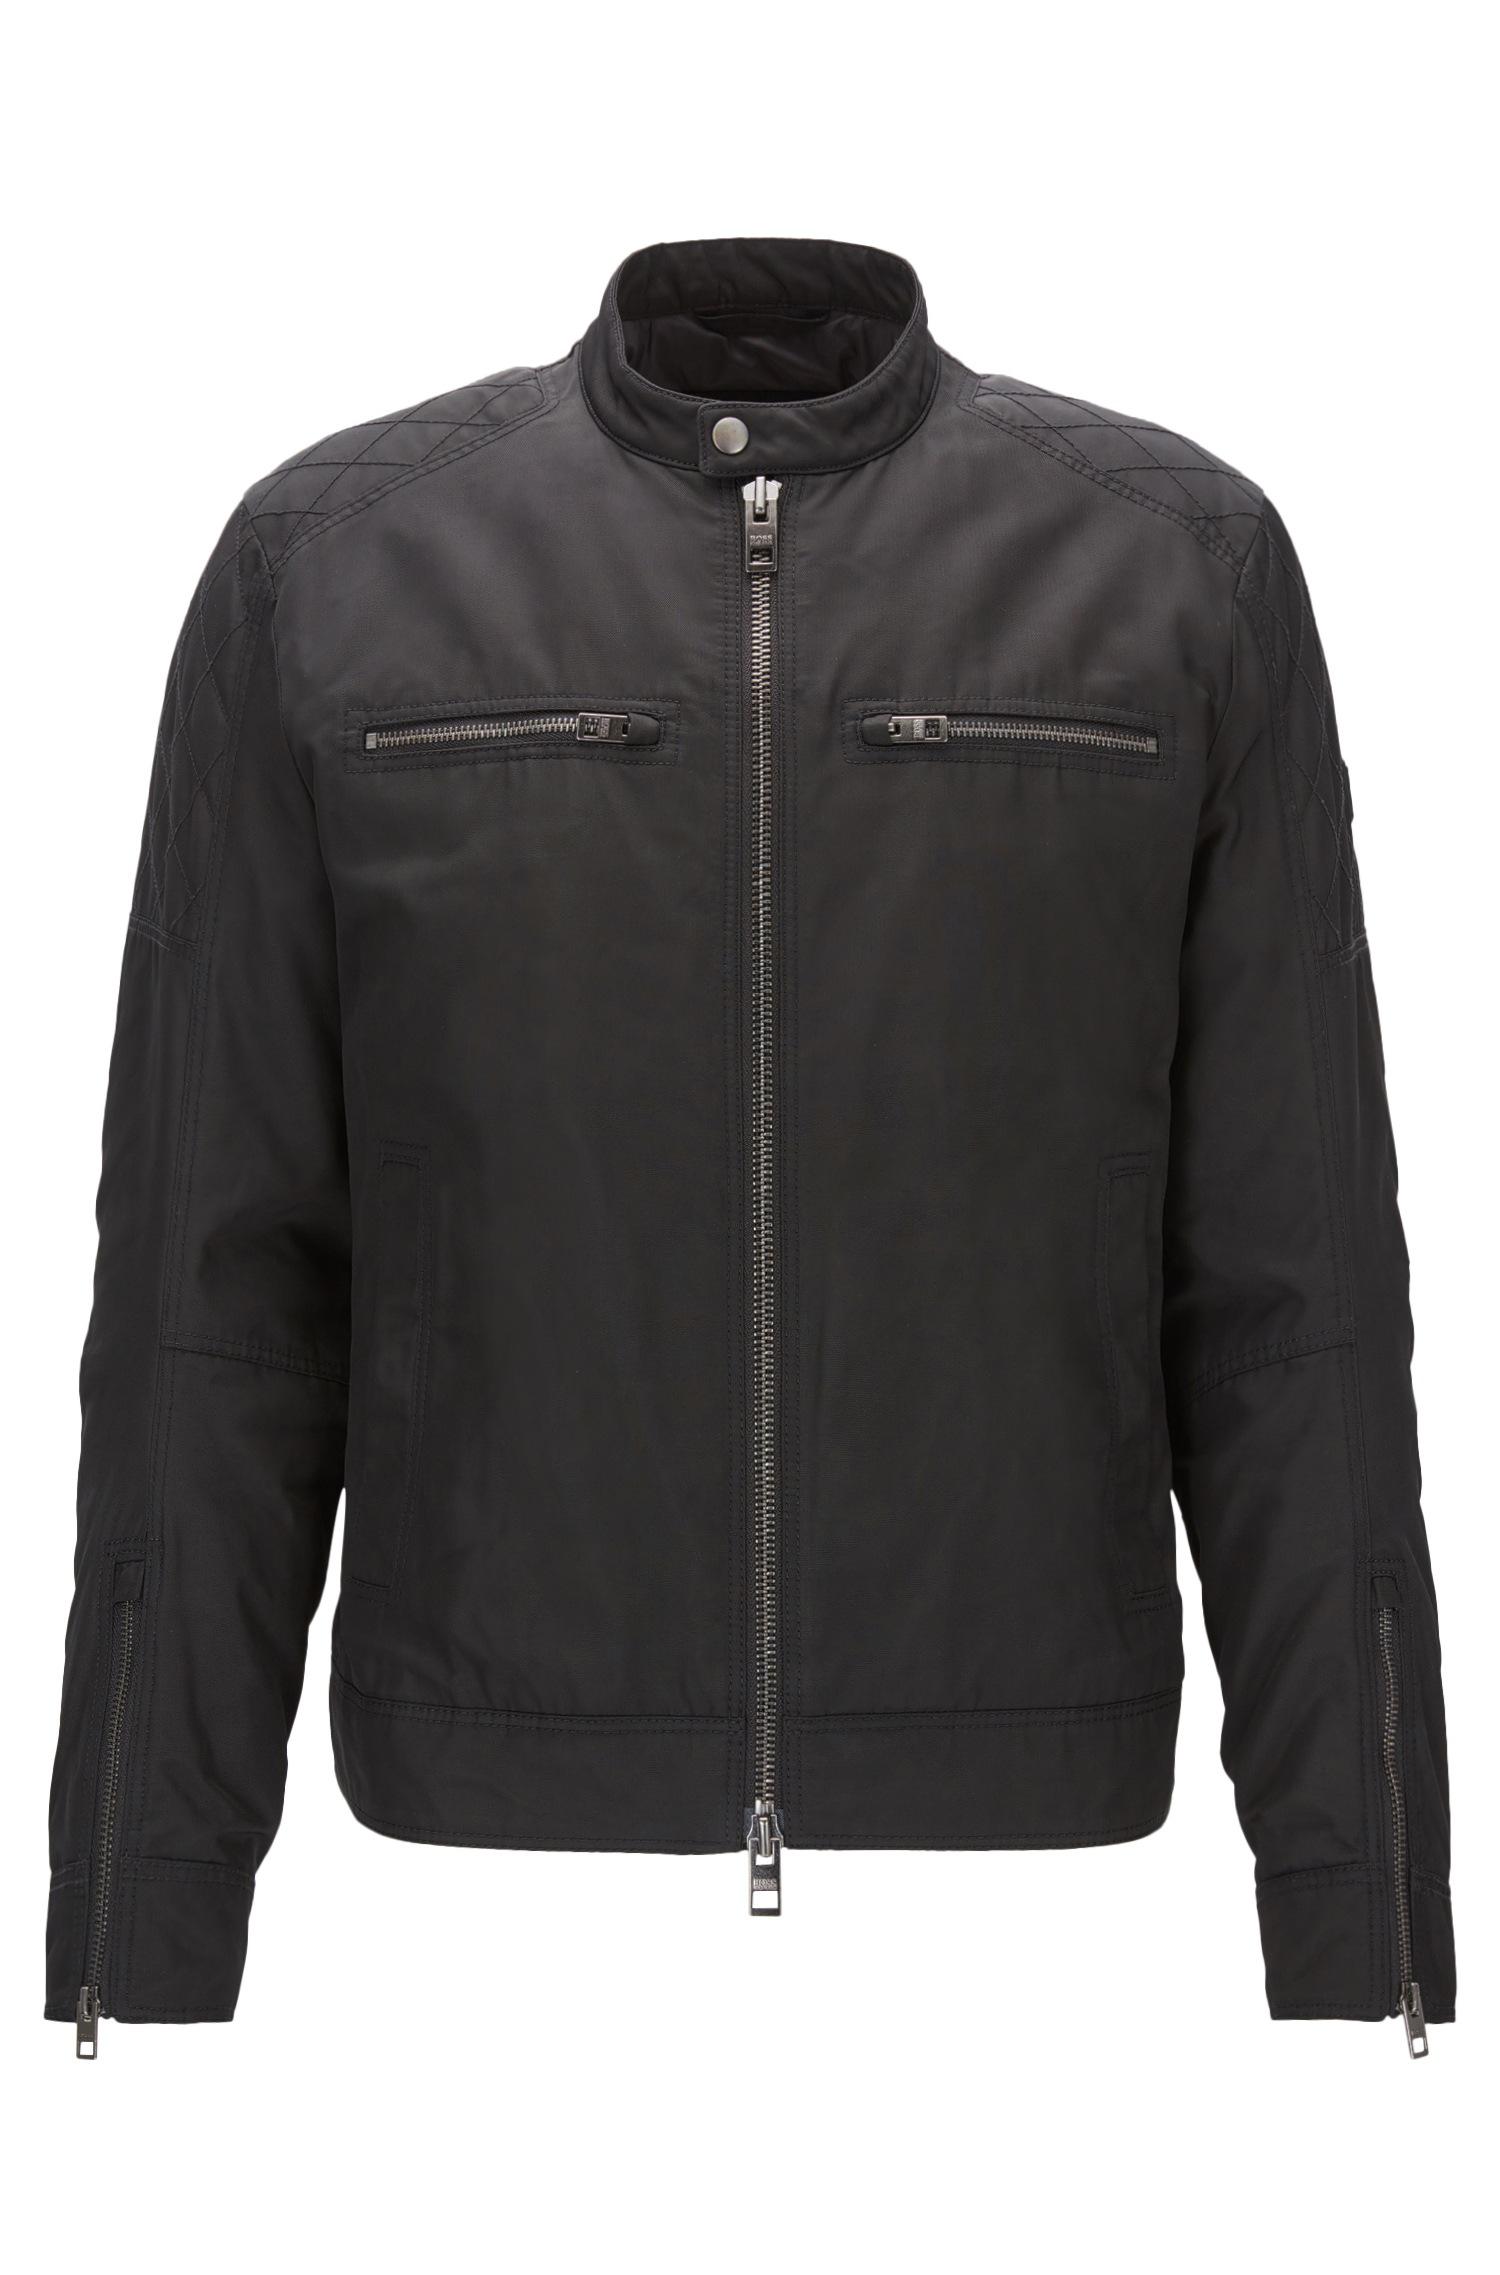 BOSS Slim-fit Waxed Canvas Jacket With Primaloft® in Black for Men - Lyst